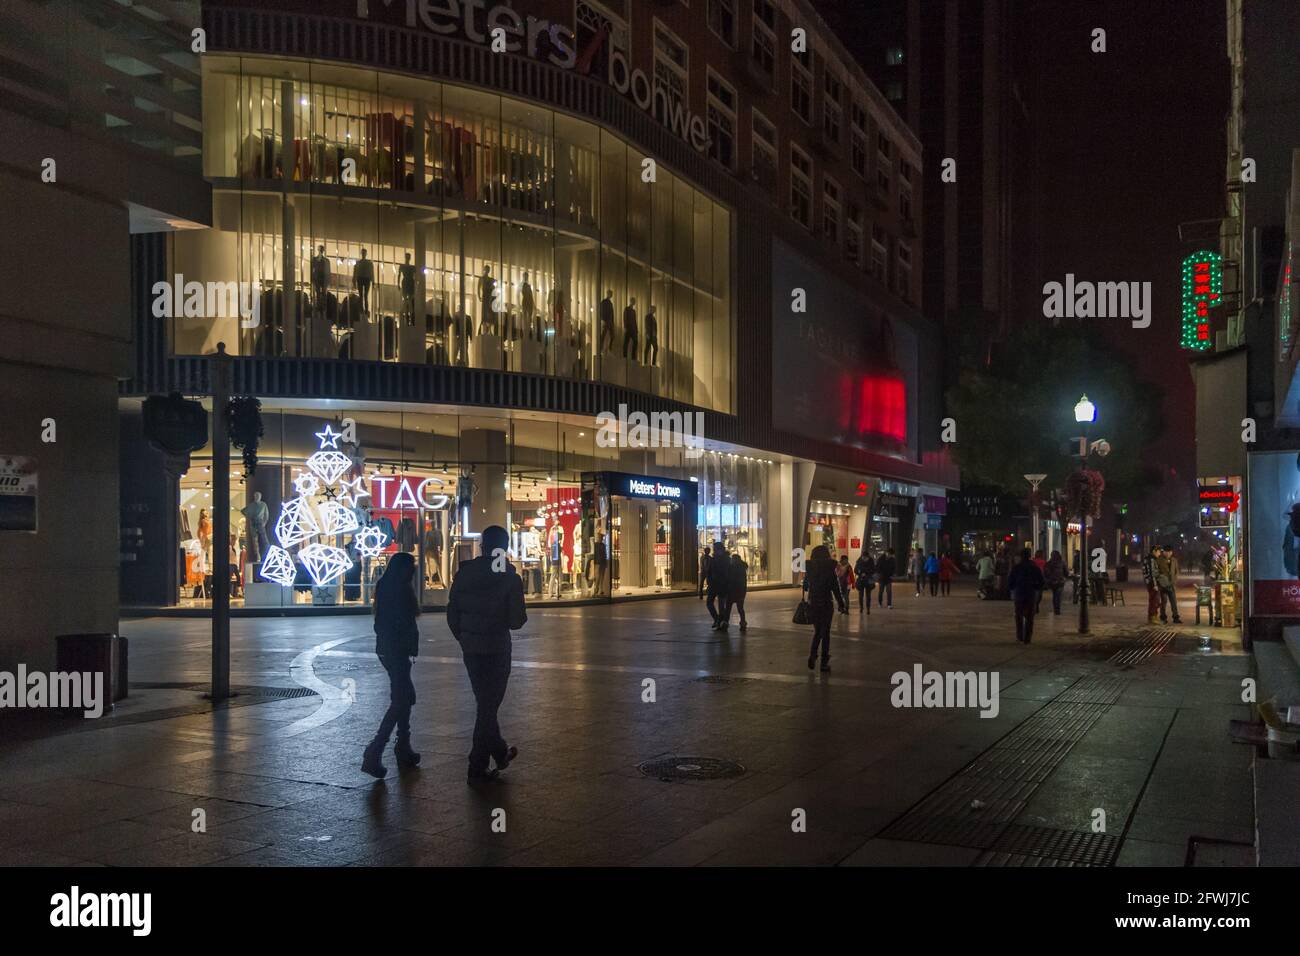 Wuhan, Hubei Province, China - February 21, 2013: A shopping street in downtown Wuhan, China at night Stock Photo